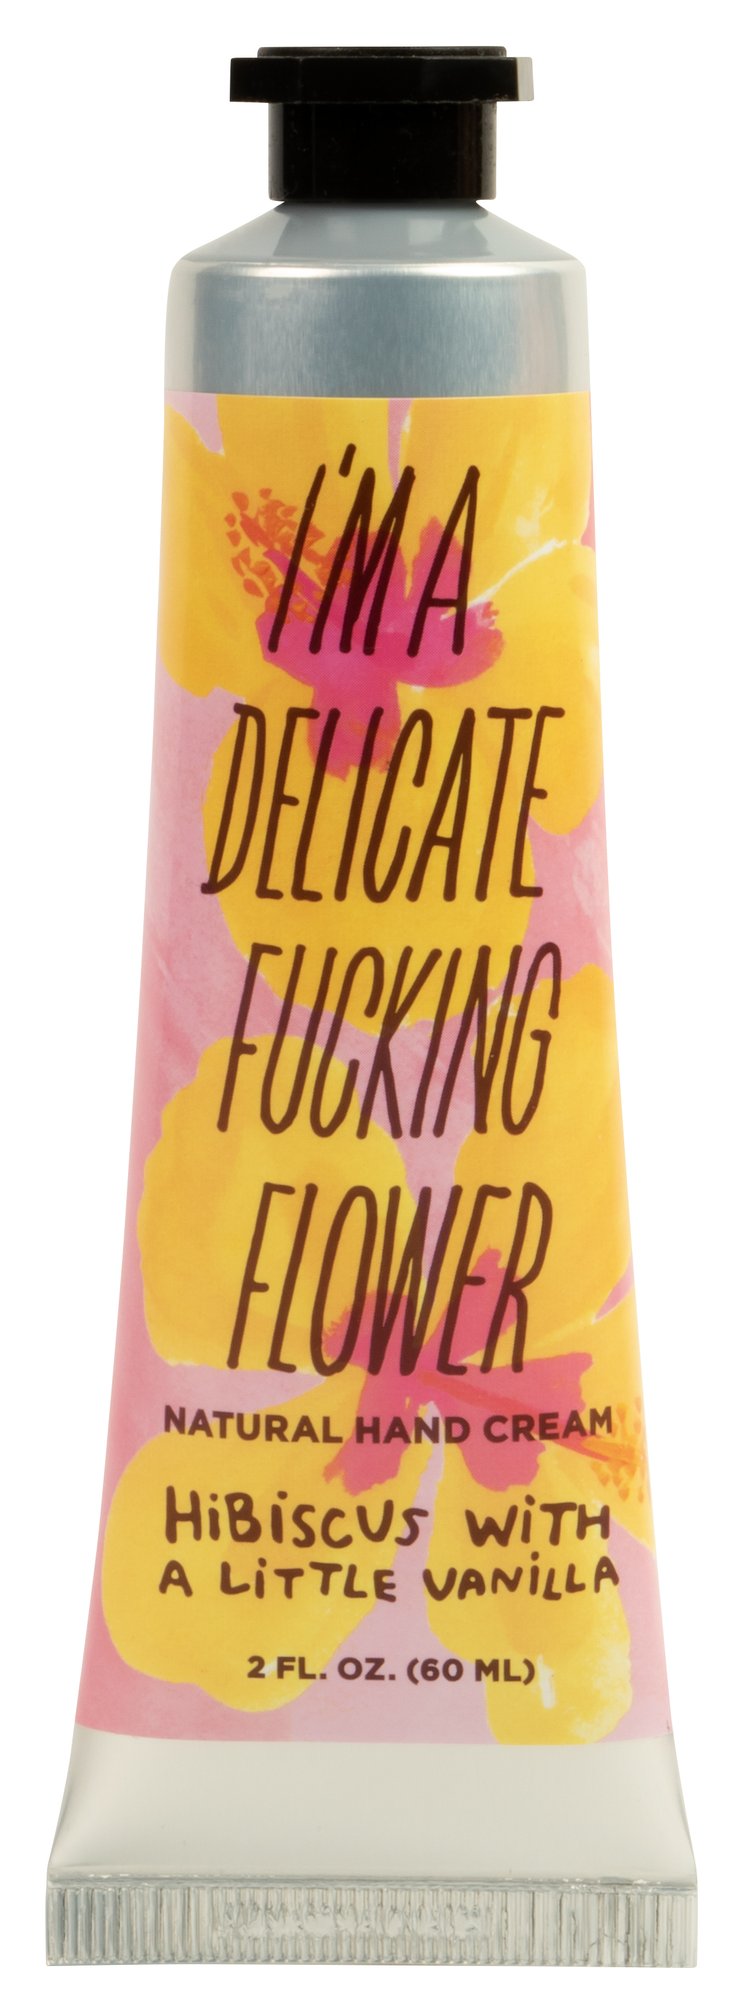 I'M A DELICATE F***ING FLOWER NATURAL HAND CREAMS